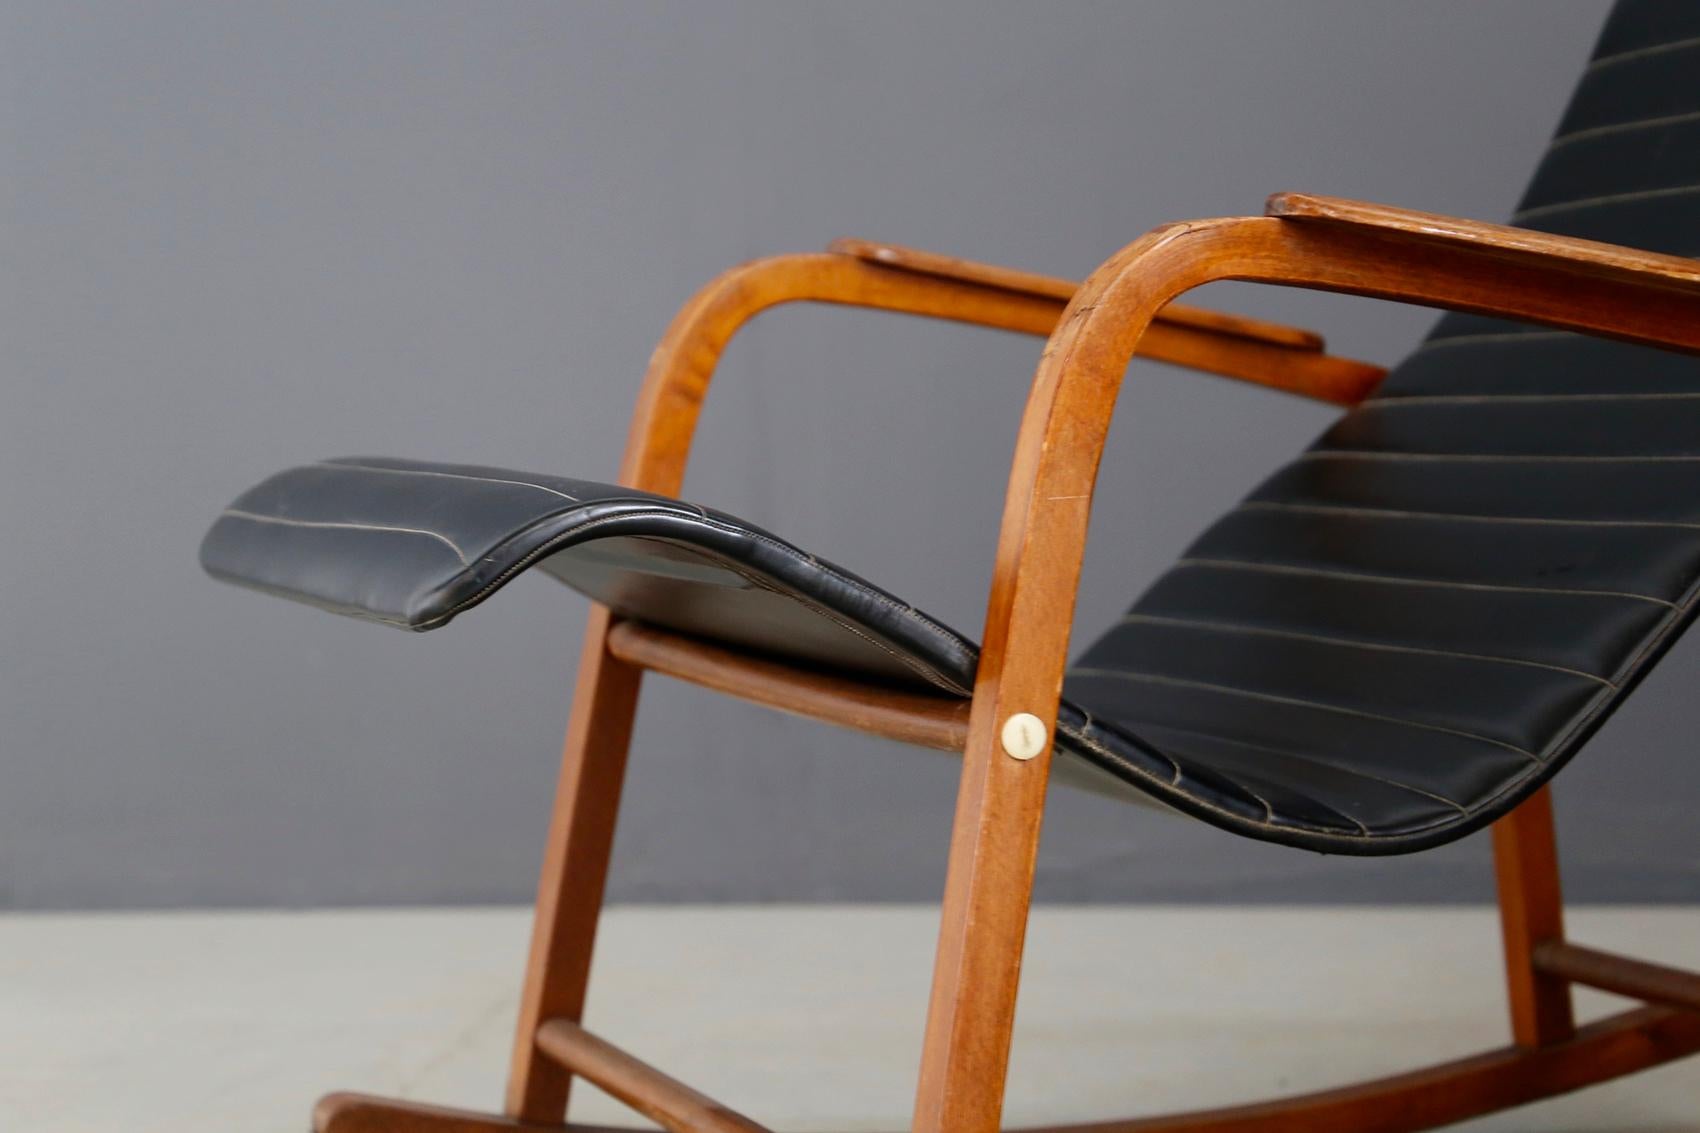 Rare Italian-made rocking chair from the 1950s.
The rocking chair is made of wood for its structure while the seat cover is in black leather.
The leather is in excellent condition, has only slight scratches.
The great comfort of the seat is given